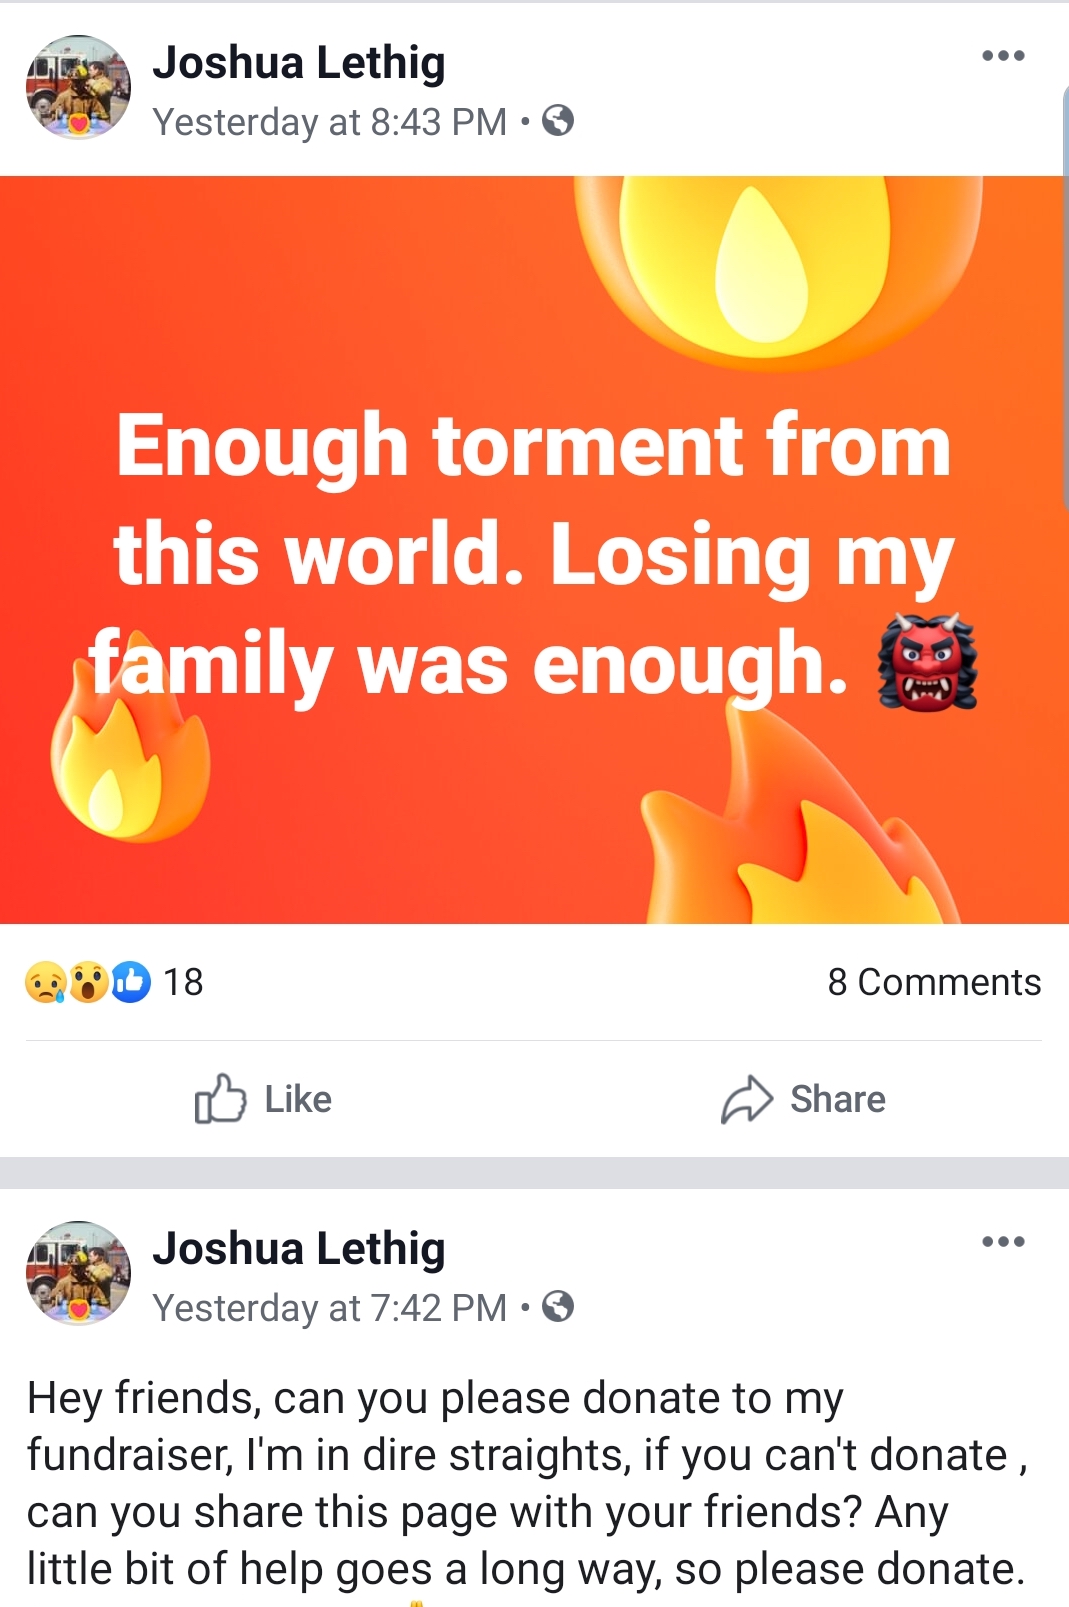 orange - Joshua Lethig Yesterday at Enough torment from this world. Losing my family was enough. 18 8 Joshua Lethig Yesterday at Hey friends, can you please donate to my fundraiser, I'm in dire straights, if you can't donate, can you this page with your f